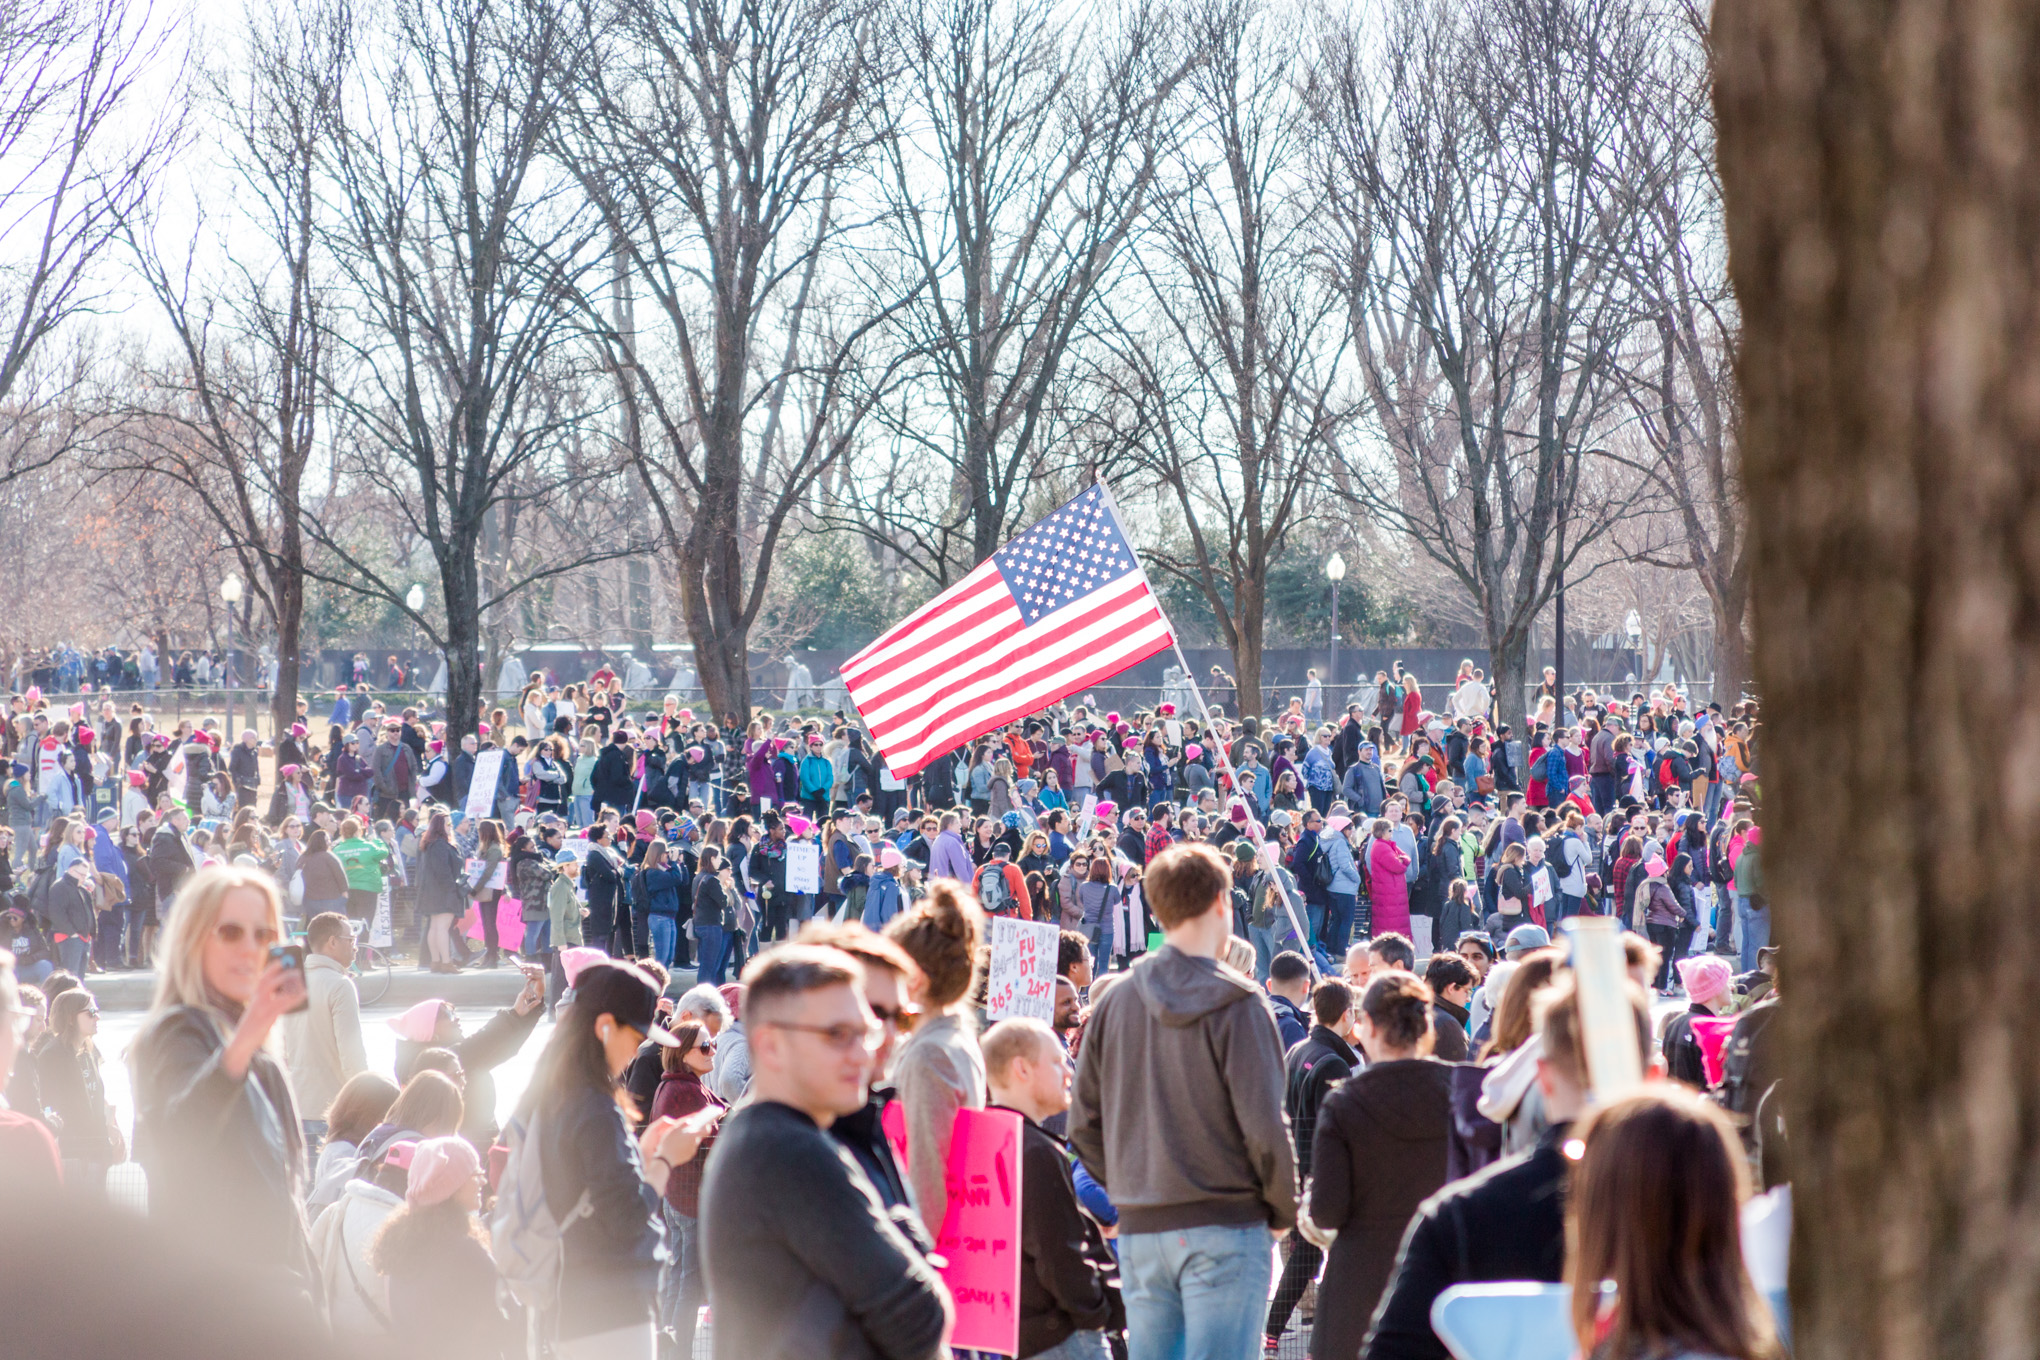 DC Women's March, Women's March, Washington, DC, photo journalism, January 2018, American flag, reflecting pool, protest